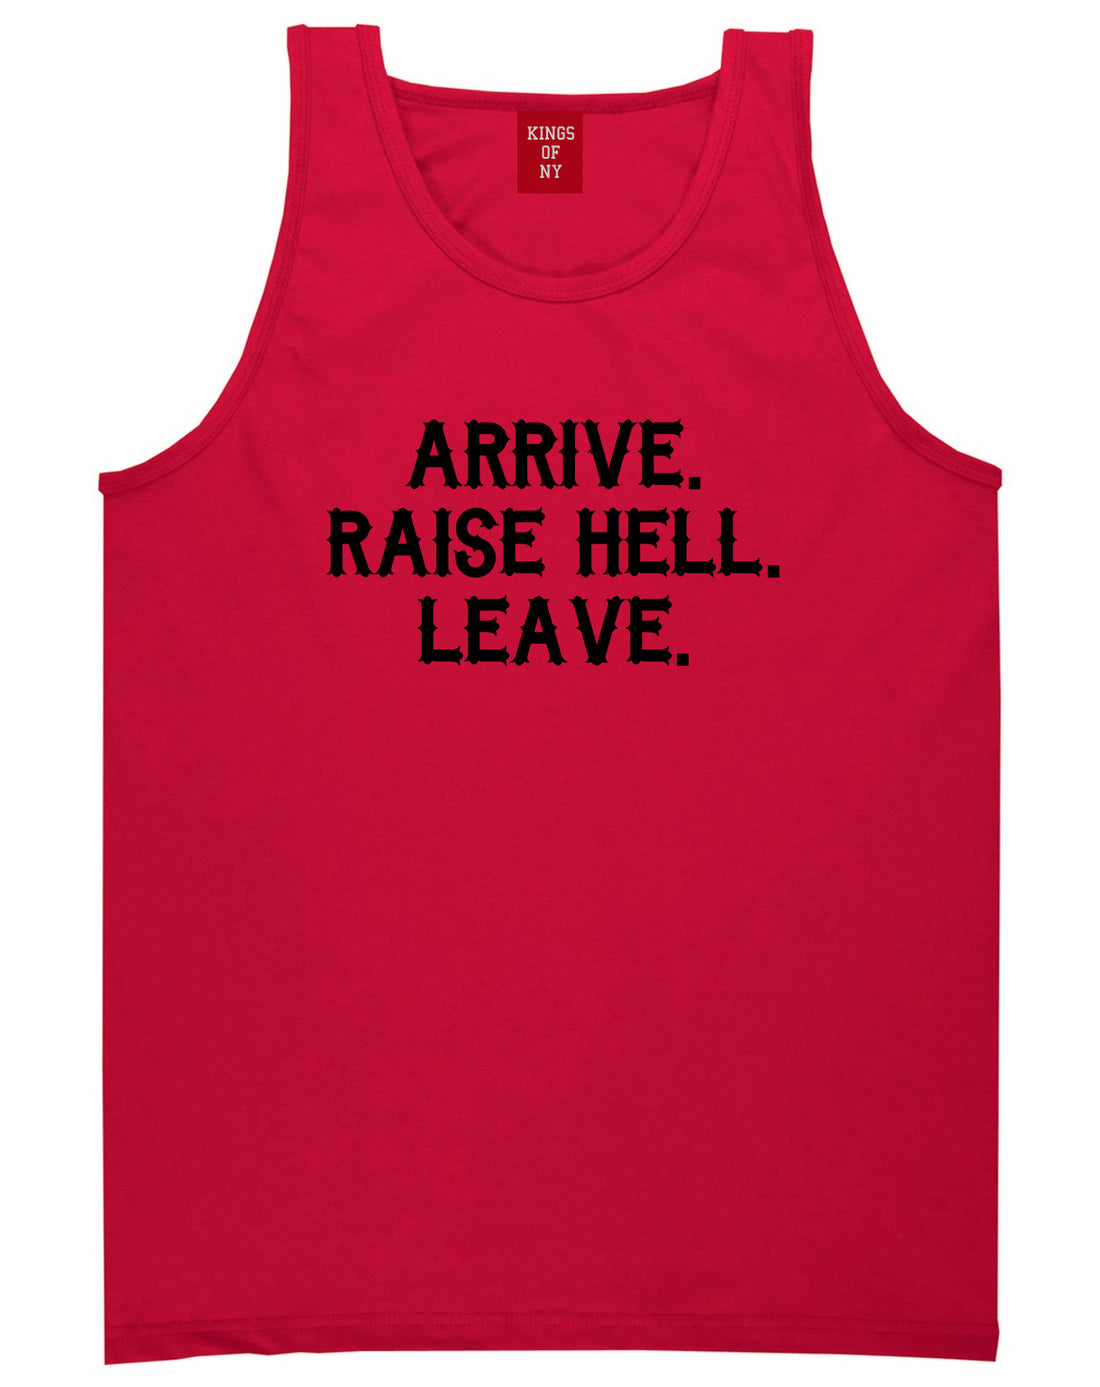 Arrive Raise Hell Leave Mens Tank Top T-Shirt Red